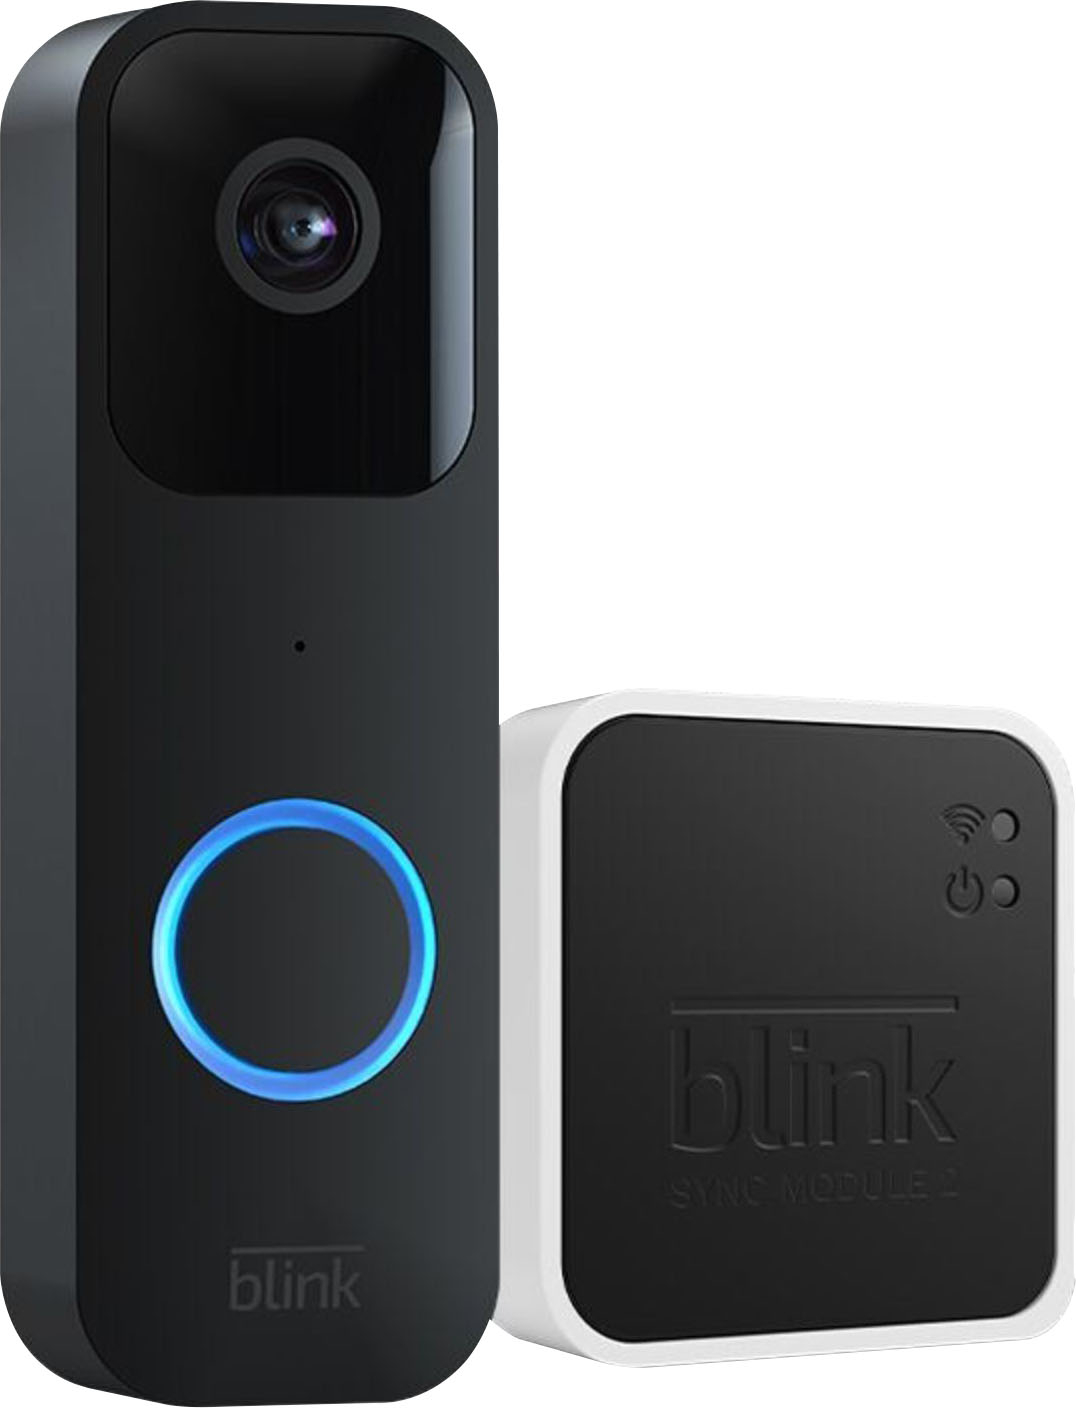 This Three-camera Blink Bundle Is 58% Off Right Now